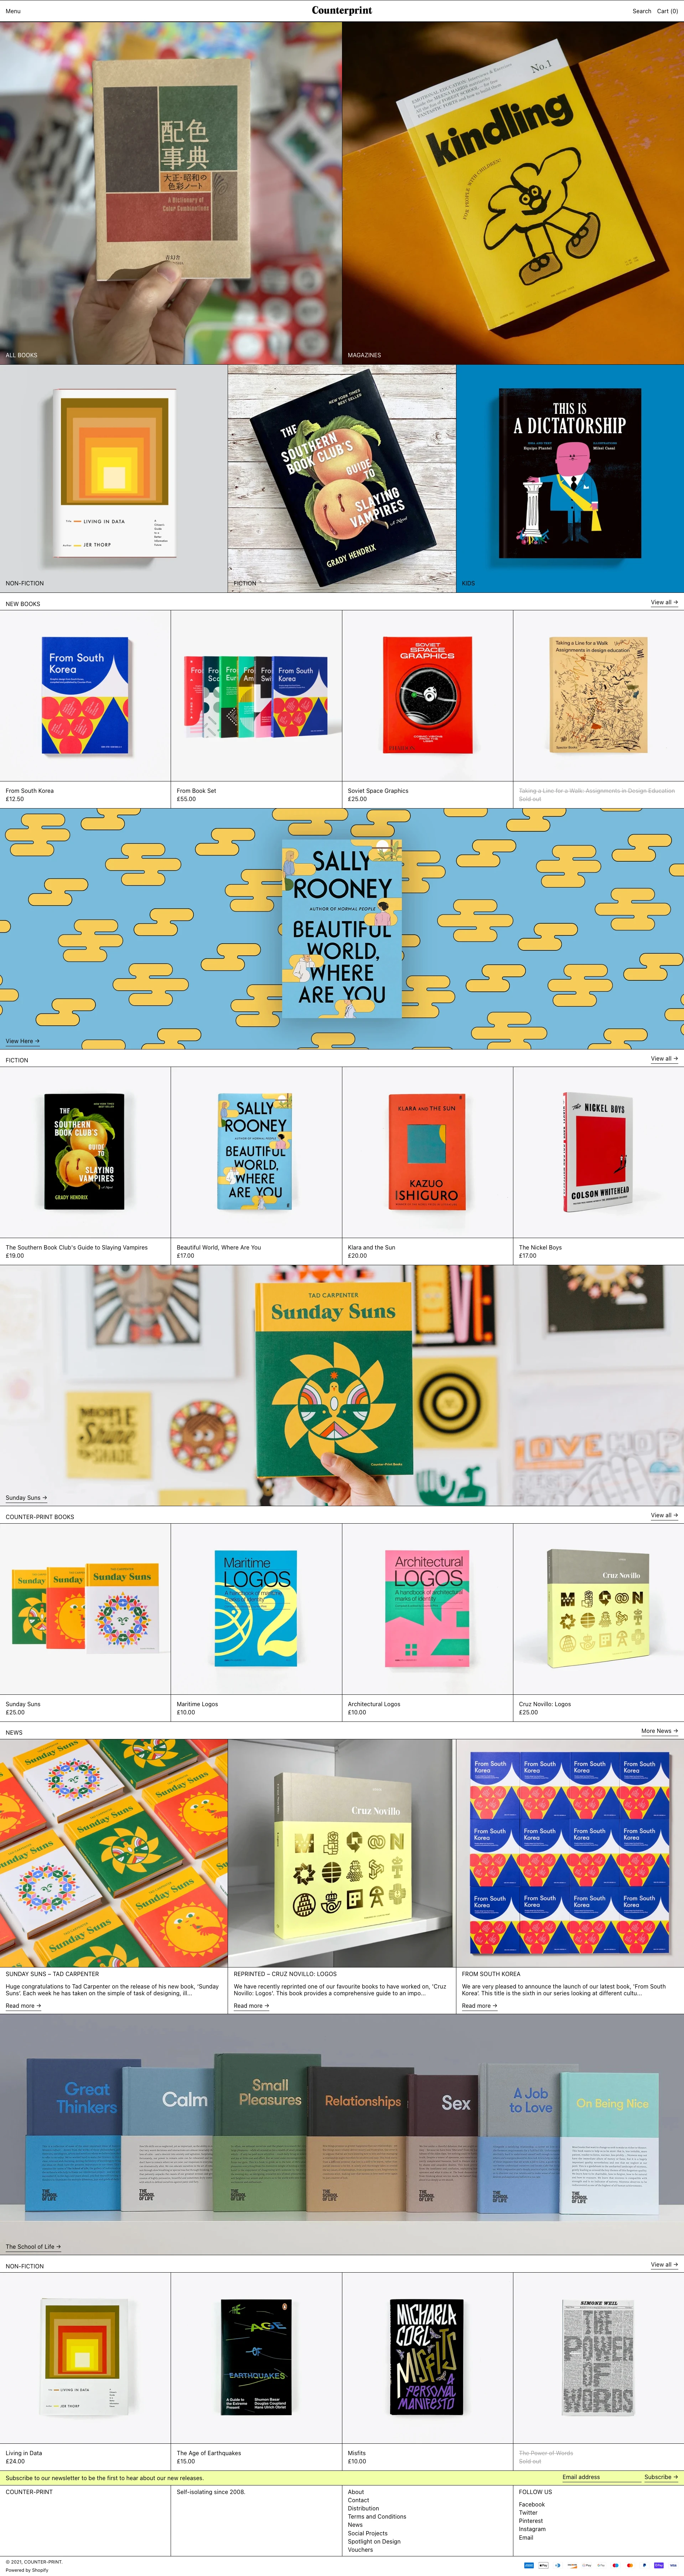 Counter-Print Landing Page Example: Counter-Print is an online book and stationery store, selling new and vintage art, design, illustration, kids, lifestyle books and office supplies.